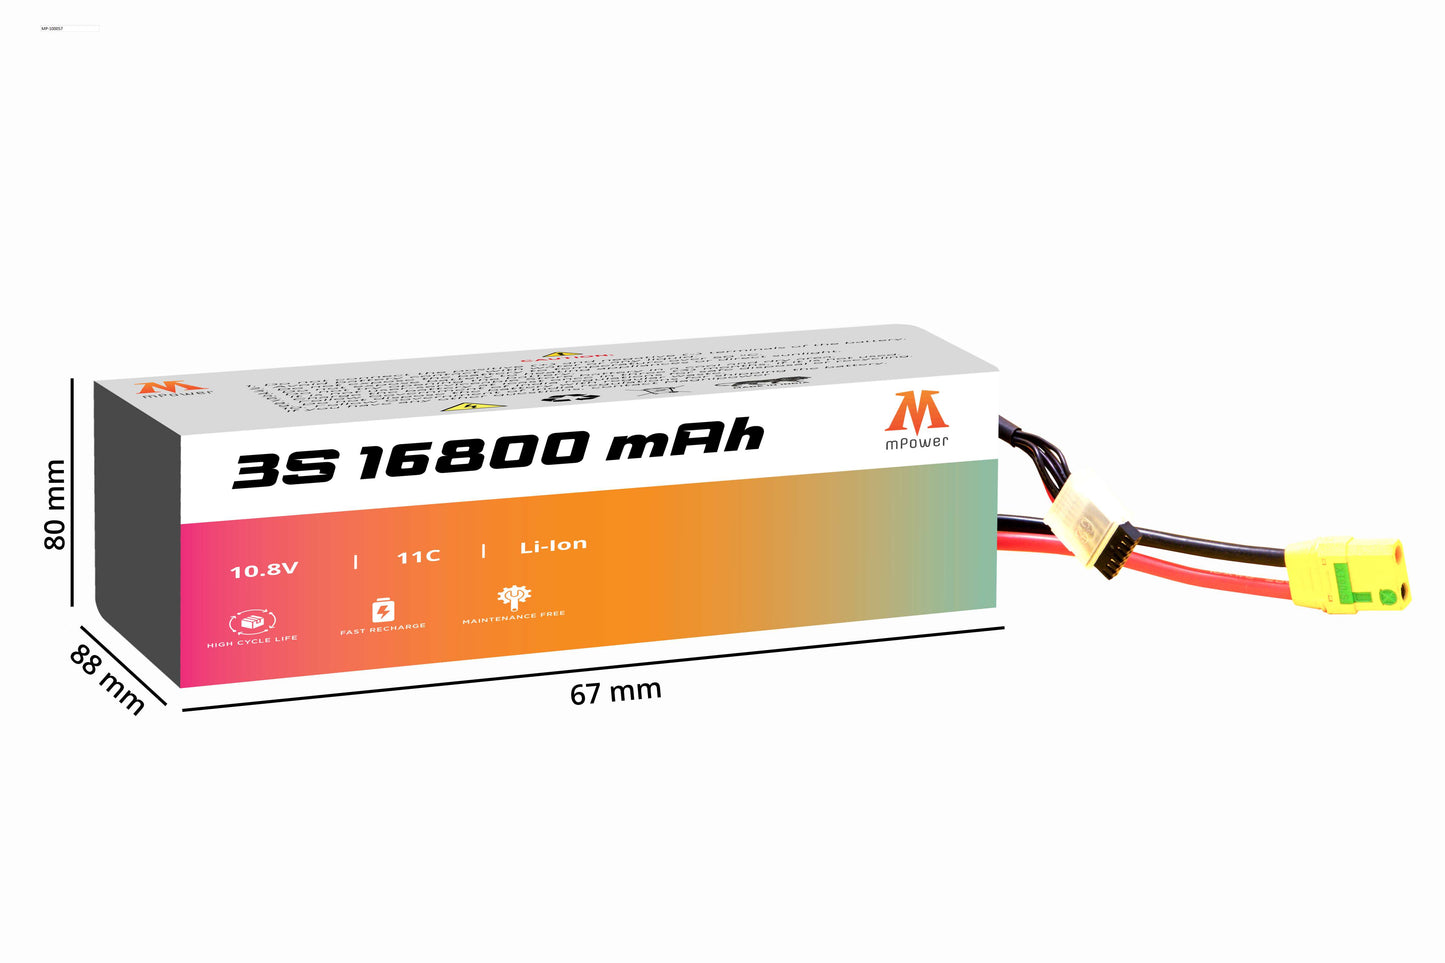 mPower 3S 16800mAh Lithium-Ion Battery for Surveillance Drones